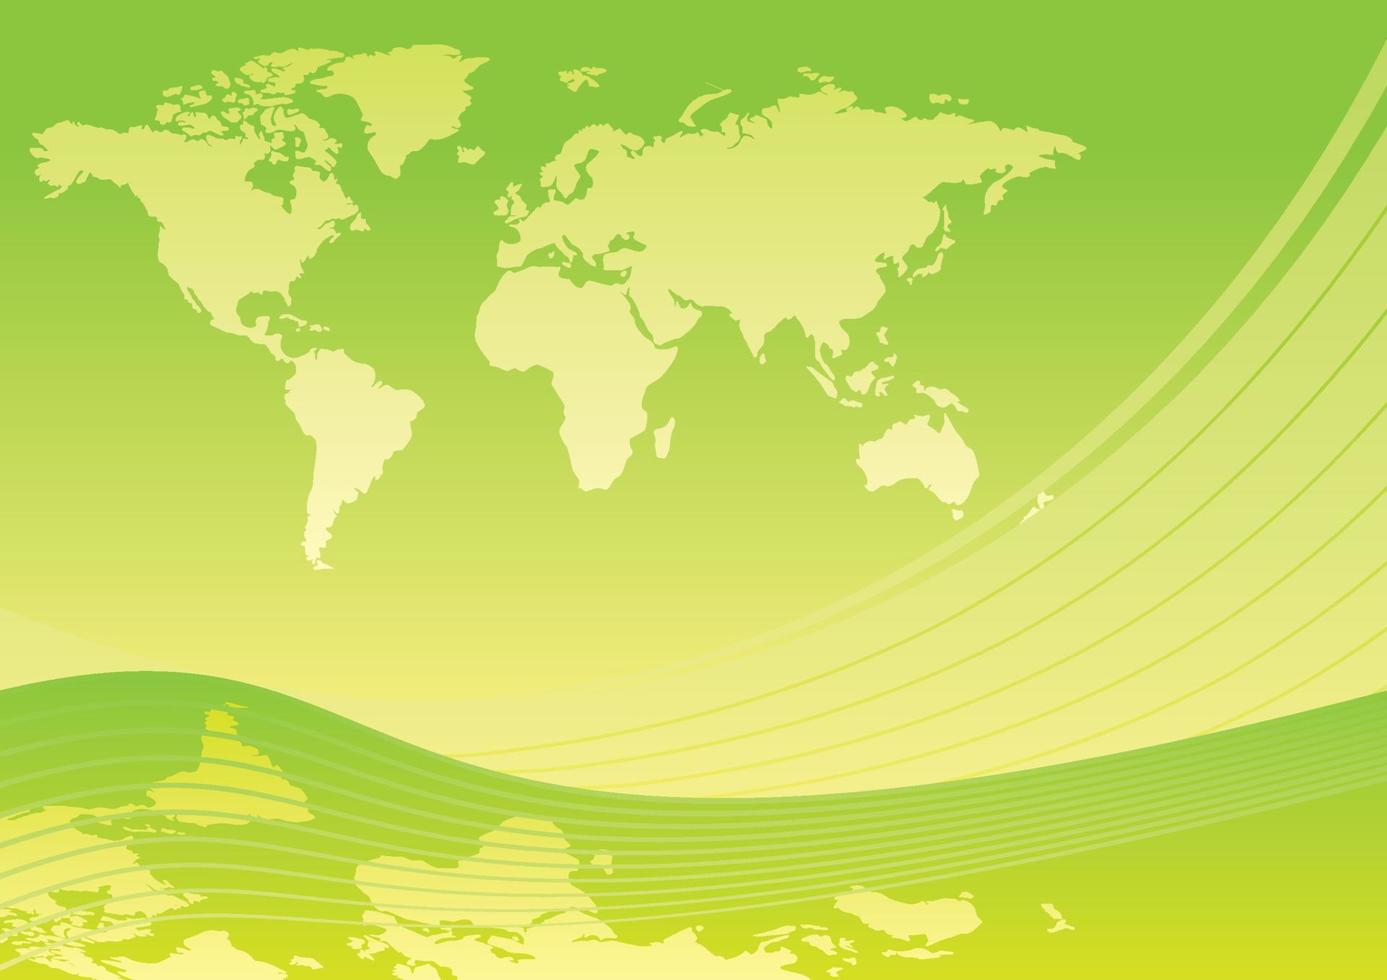 World map on the abstract green background vector